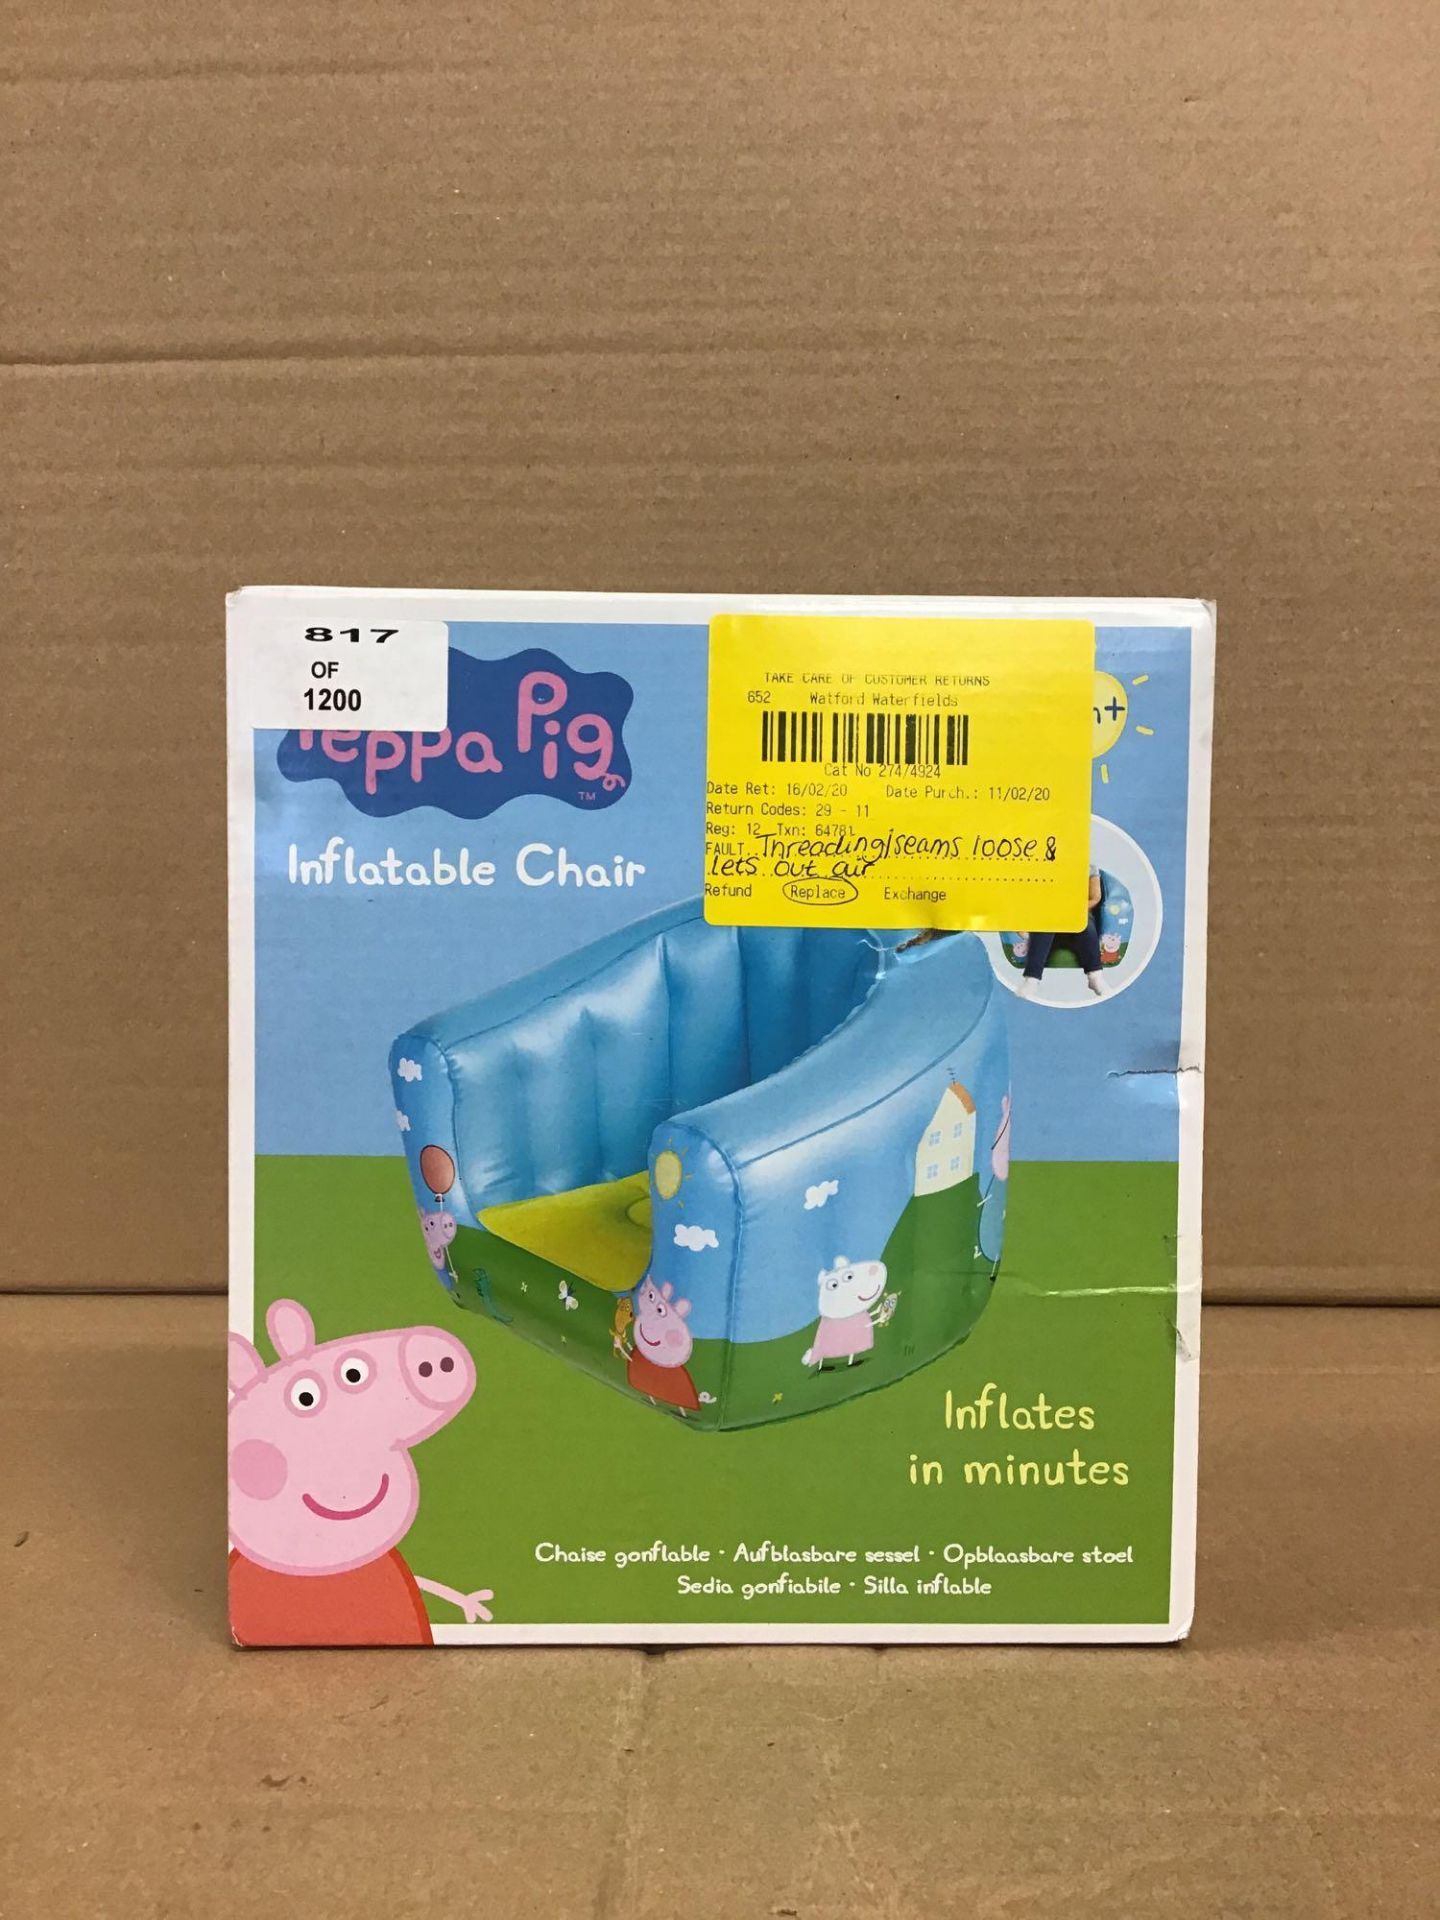 Peppa Pig Flocked Chair/Inflatable Toys (274/4924) - £11.00 RRP - Image 2 of 5